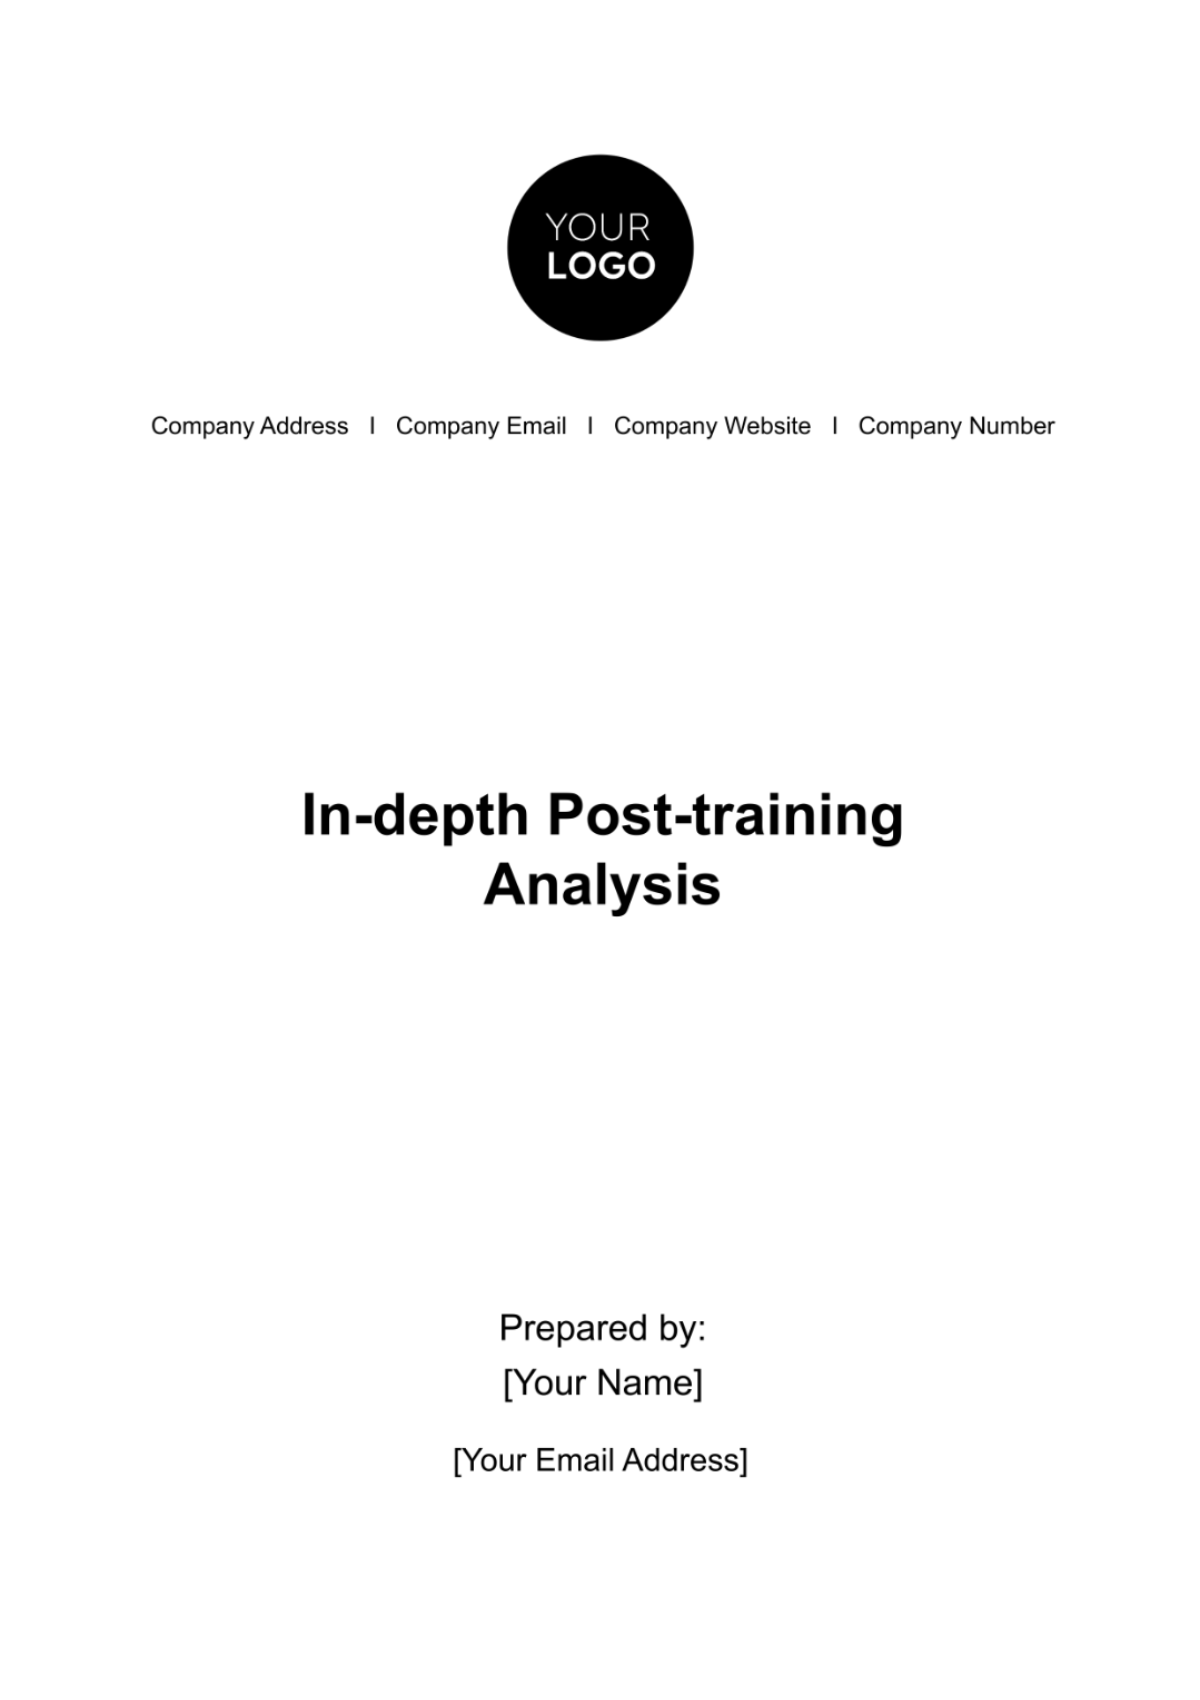 Free In-depth Post-training Analysis HR Template